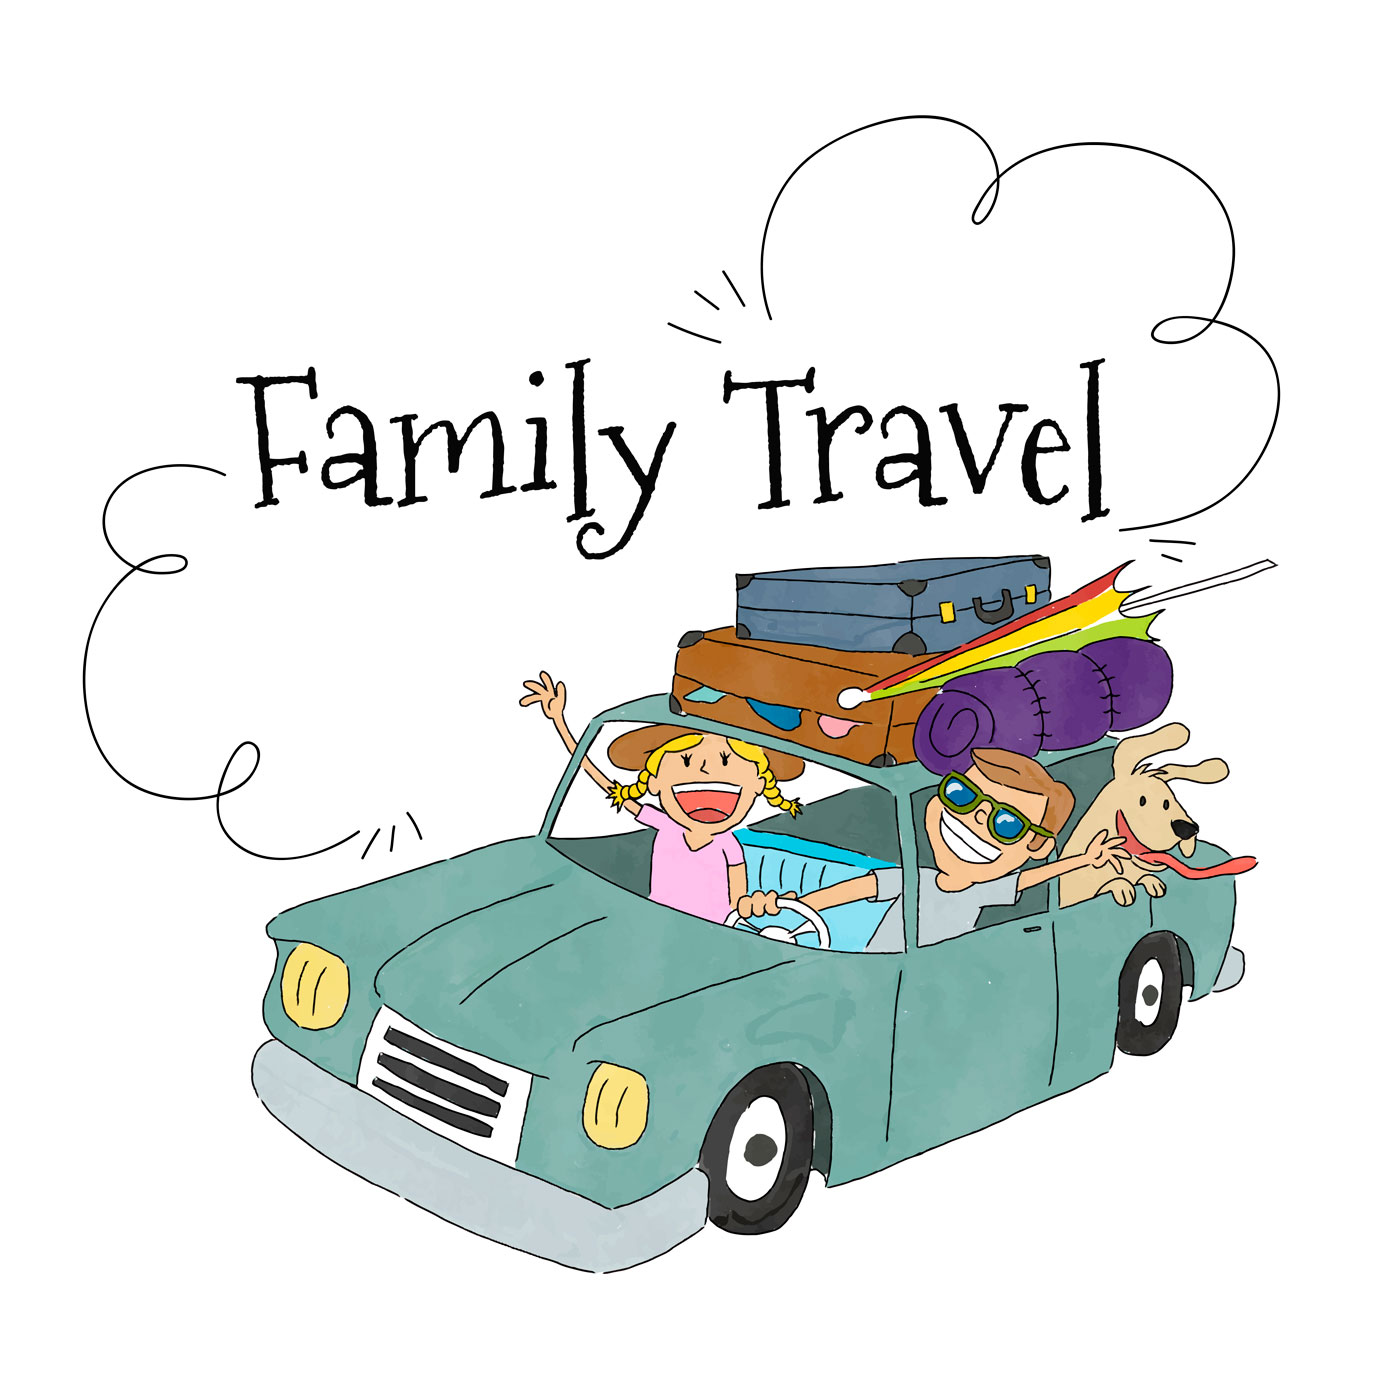 Download Family Travel Free Vector Art - (6266 Free Downloads)